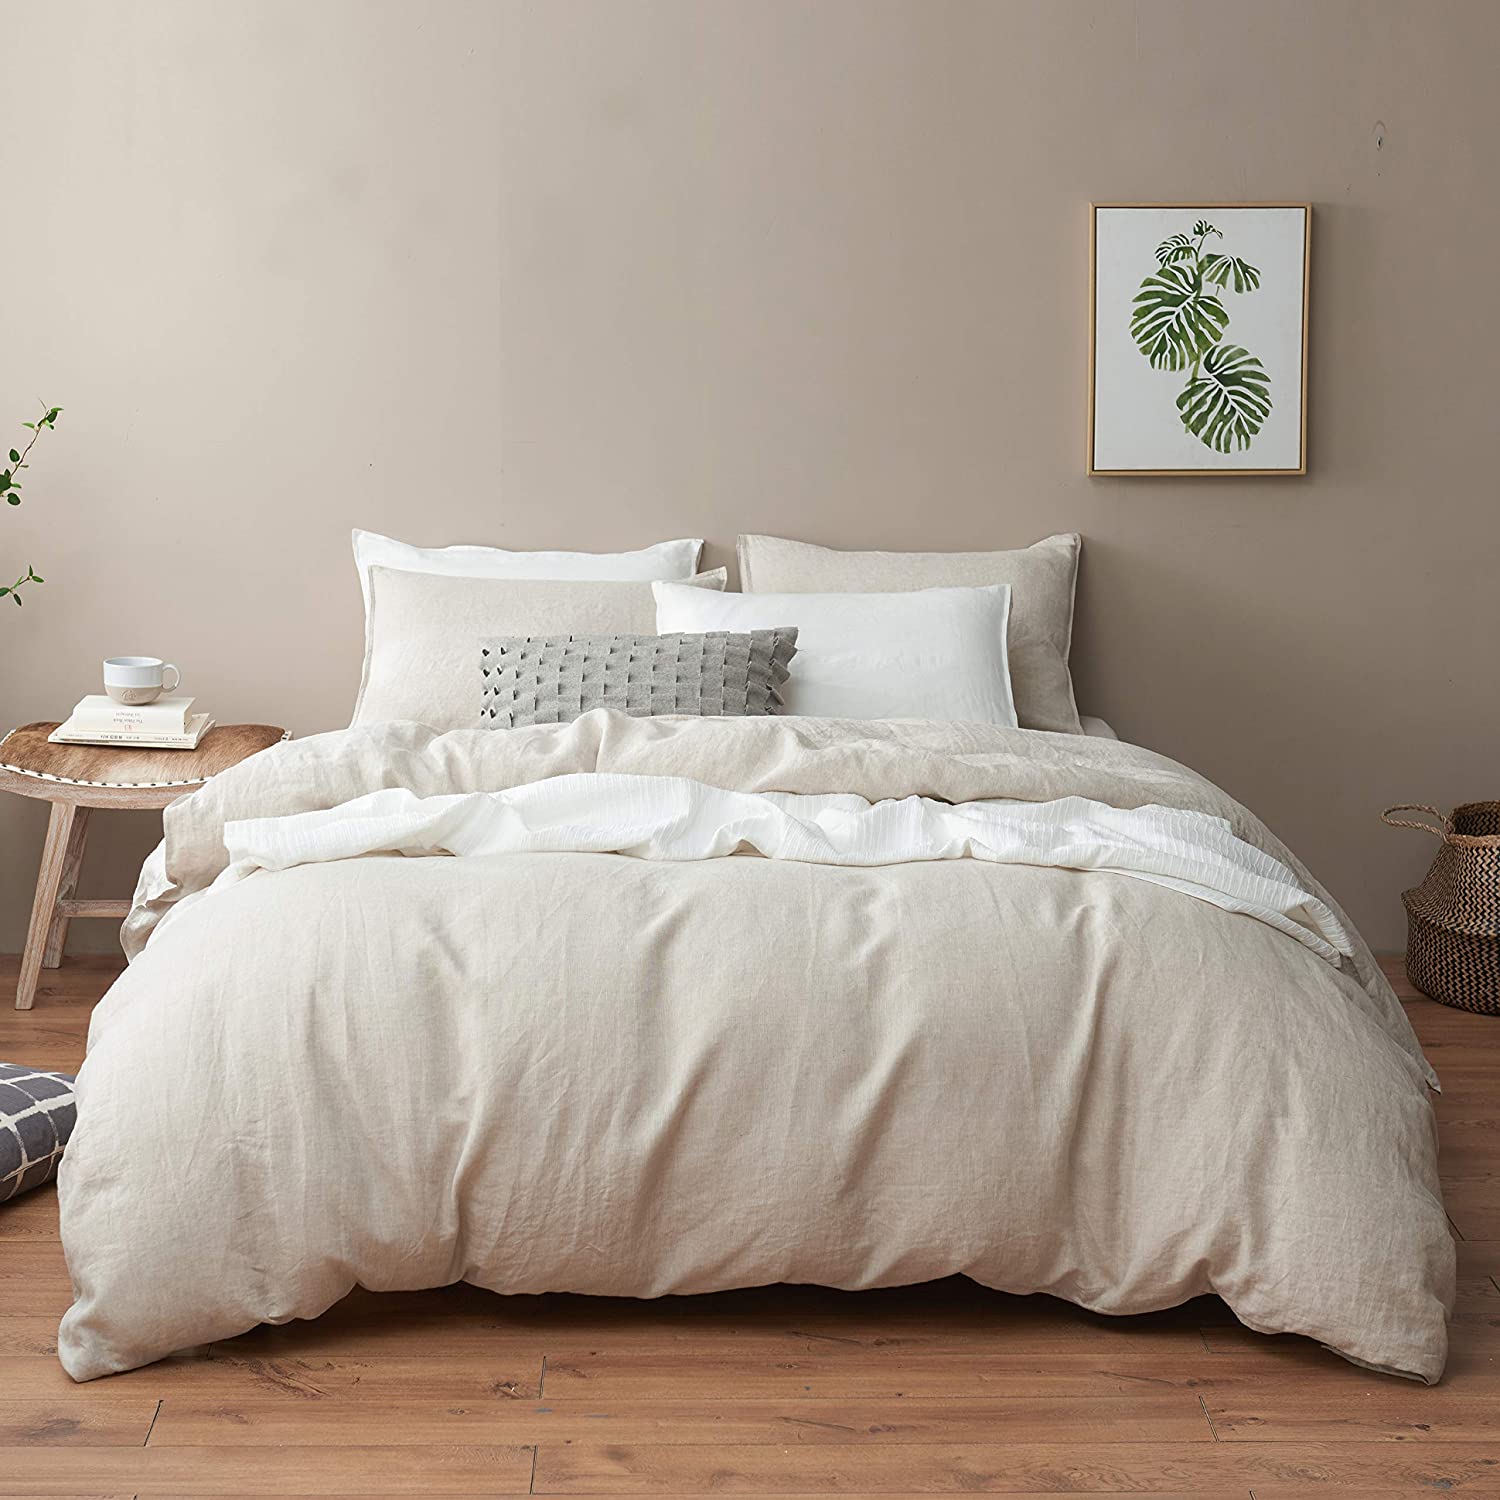 Price:$144.99  Pure Linen Duvet Cover Set, 100% Natural French Linen from Normandy, Breathable and Durable for Hot Sleepers, 1 Duvet Cover and 2 Pillowcases (Natural Linen, Full/Queen) : Home & Kitchen